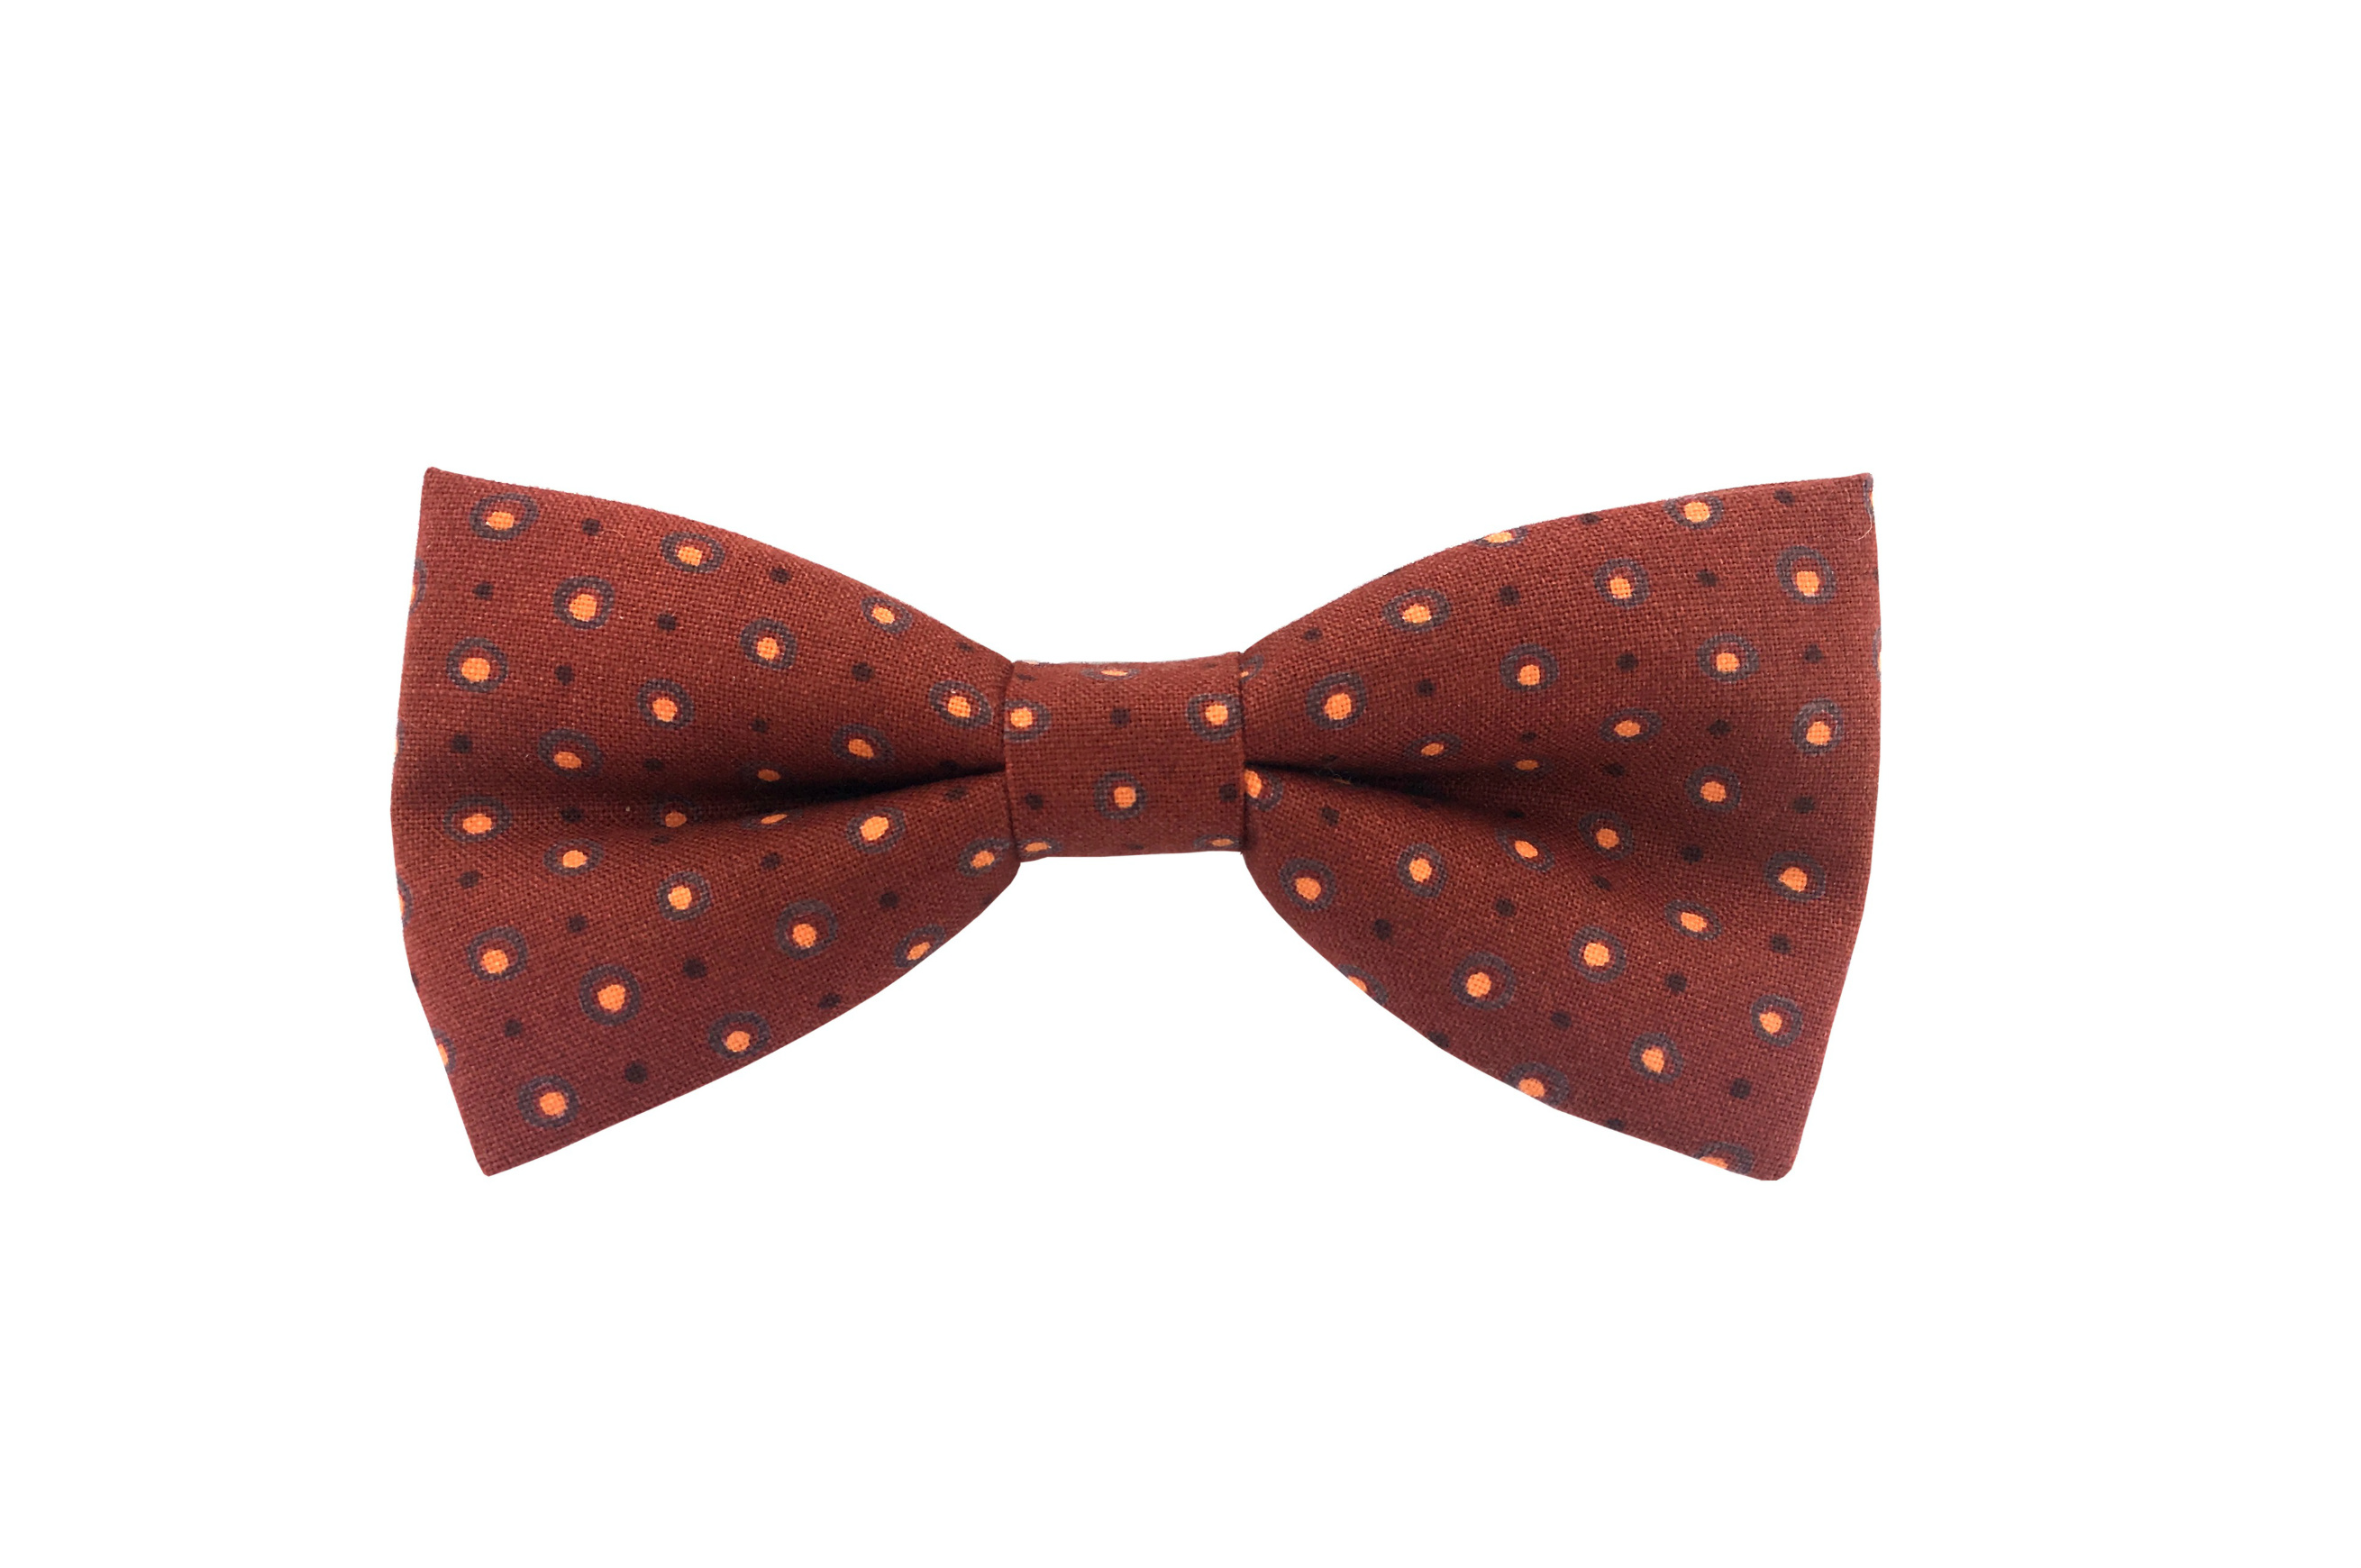 MAD COCONUT BOW TIE_PVP 30€